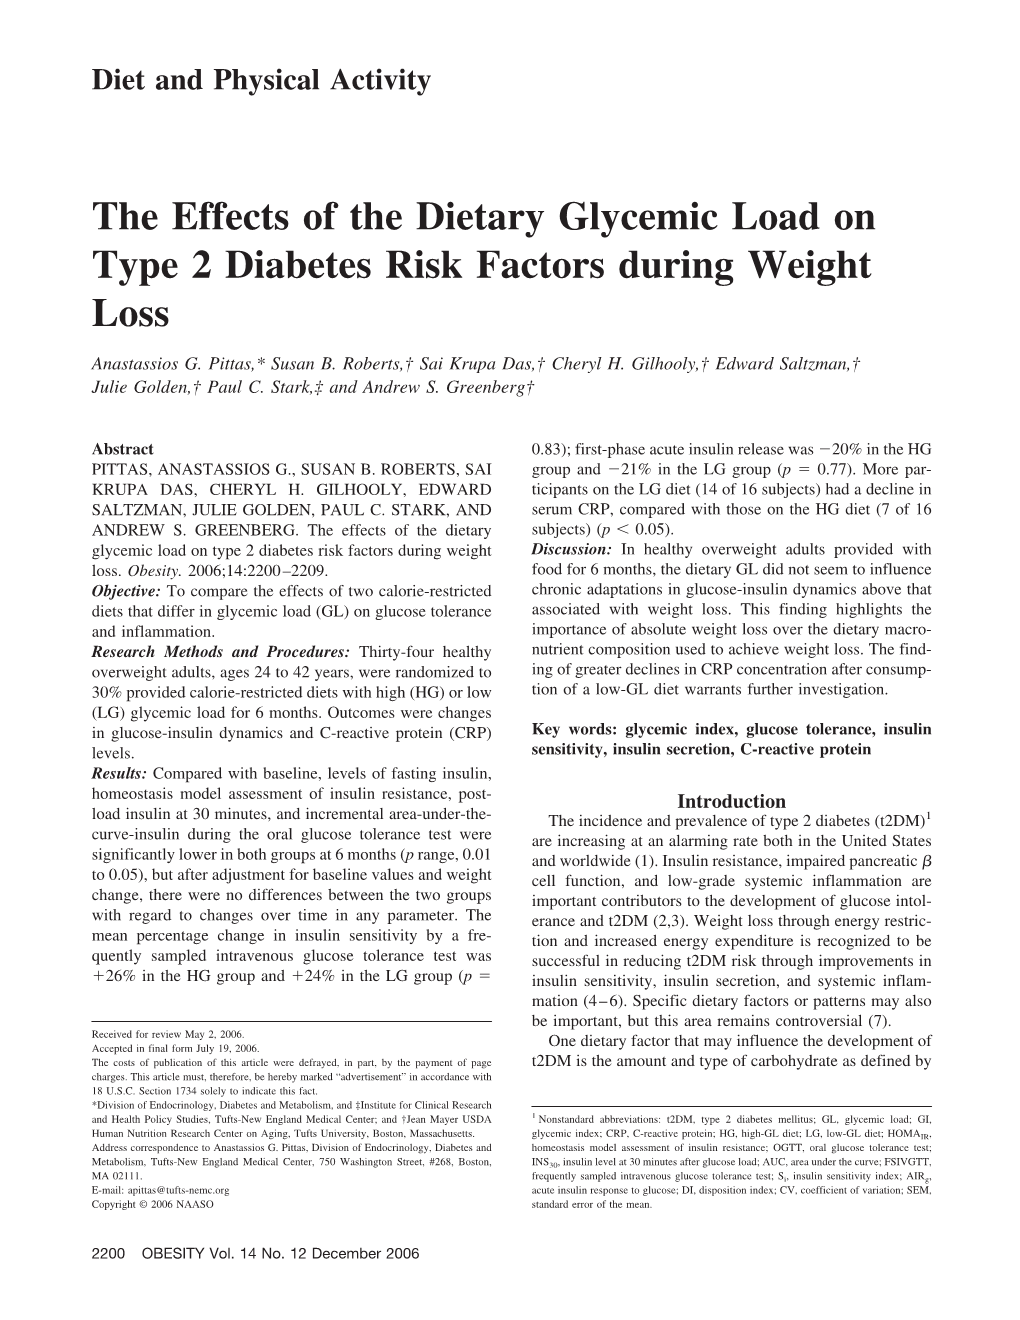 The Effects of the Dietary Glycemic Load on Type 2 Diabetes Risk Factors During Weight Loss